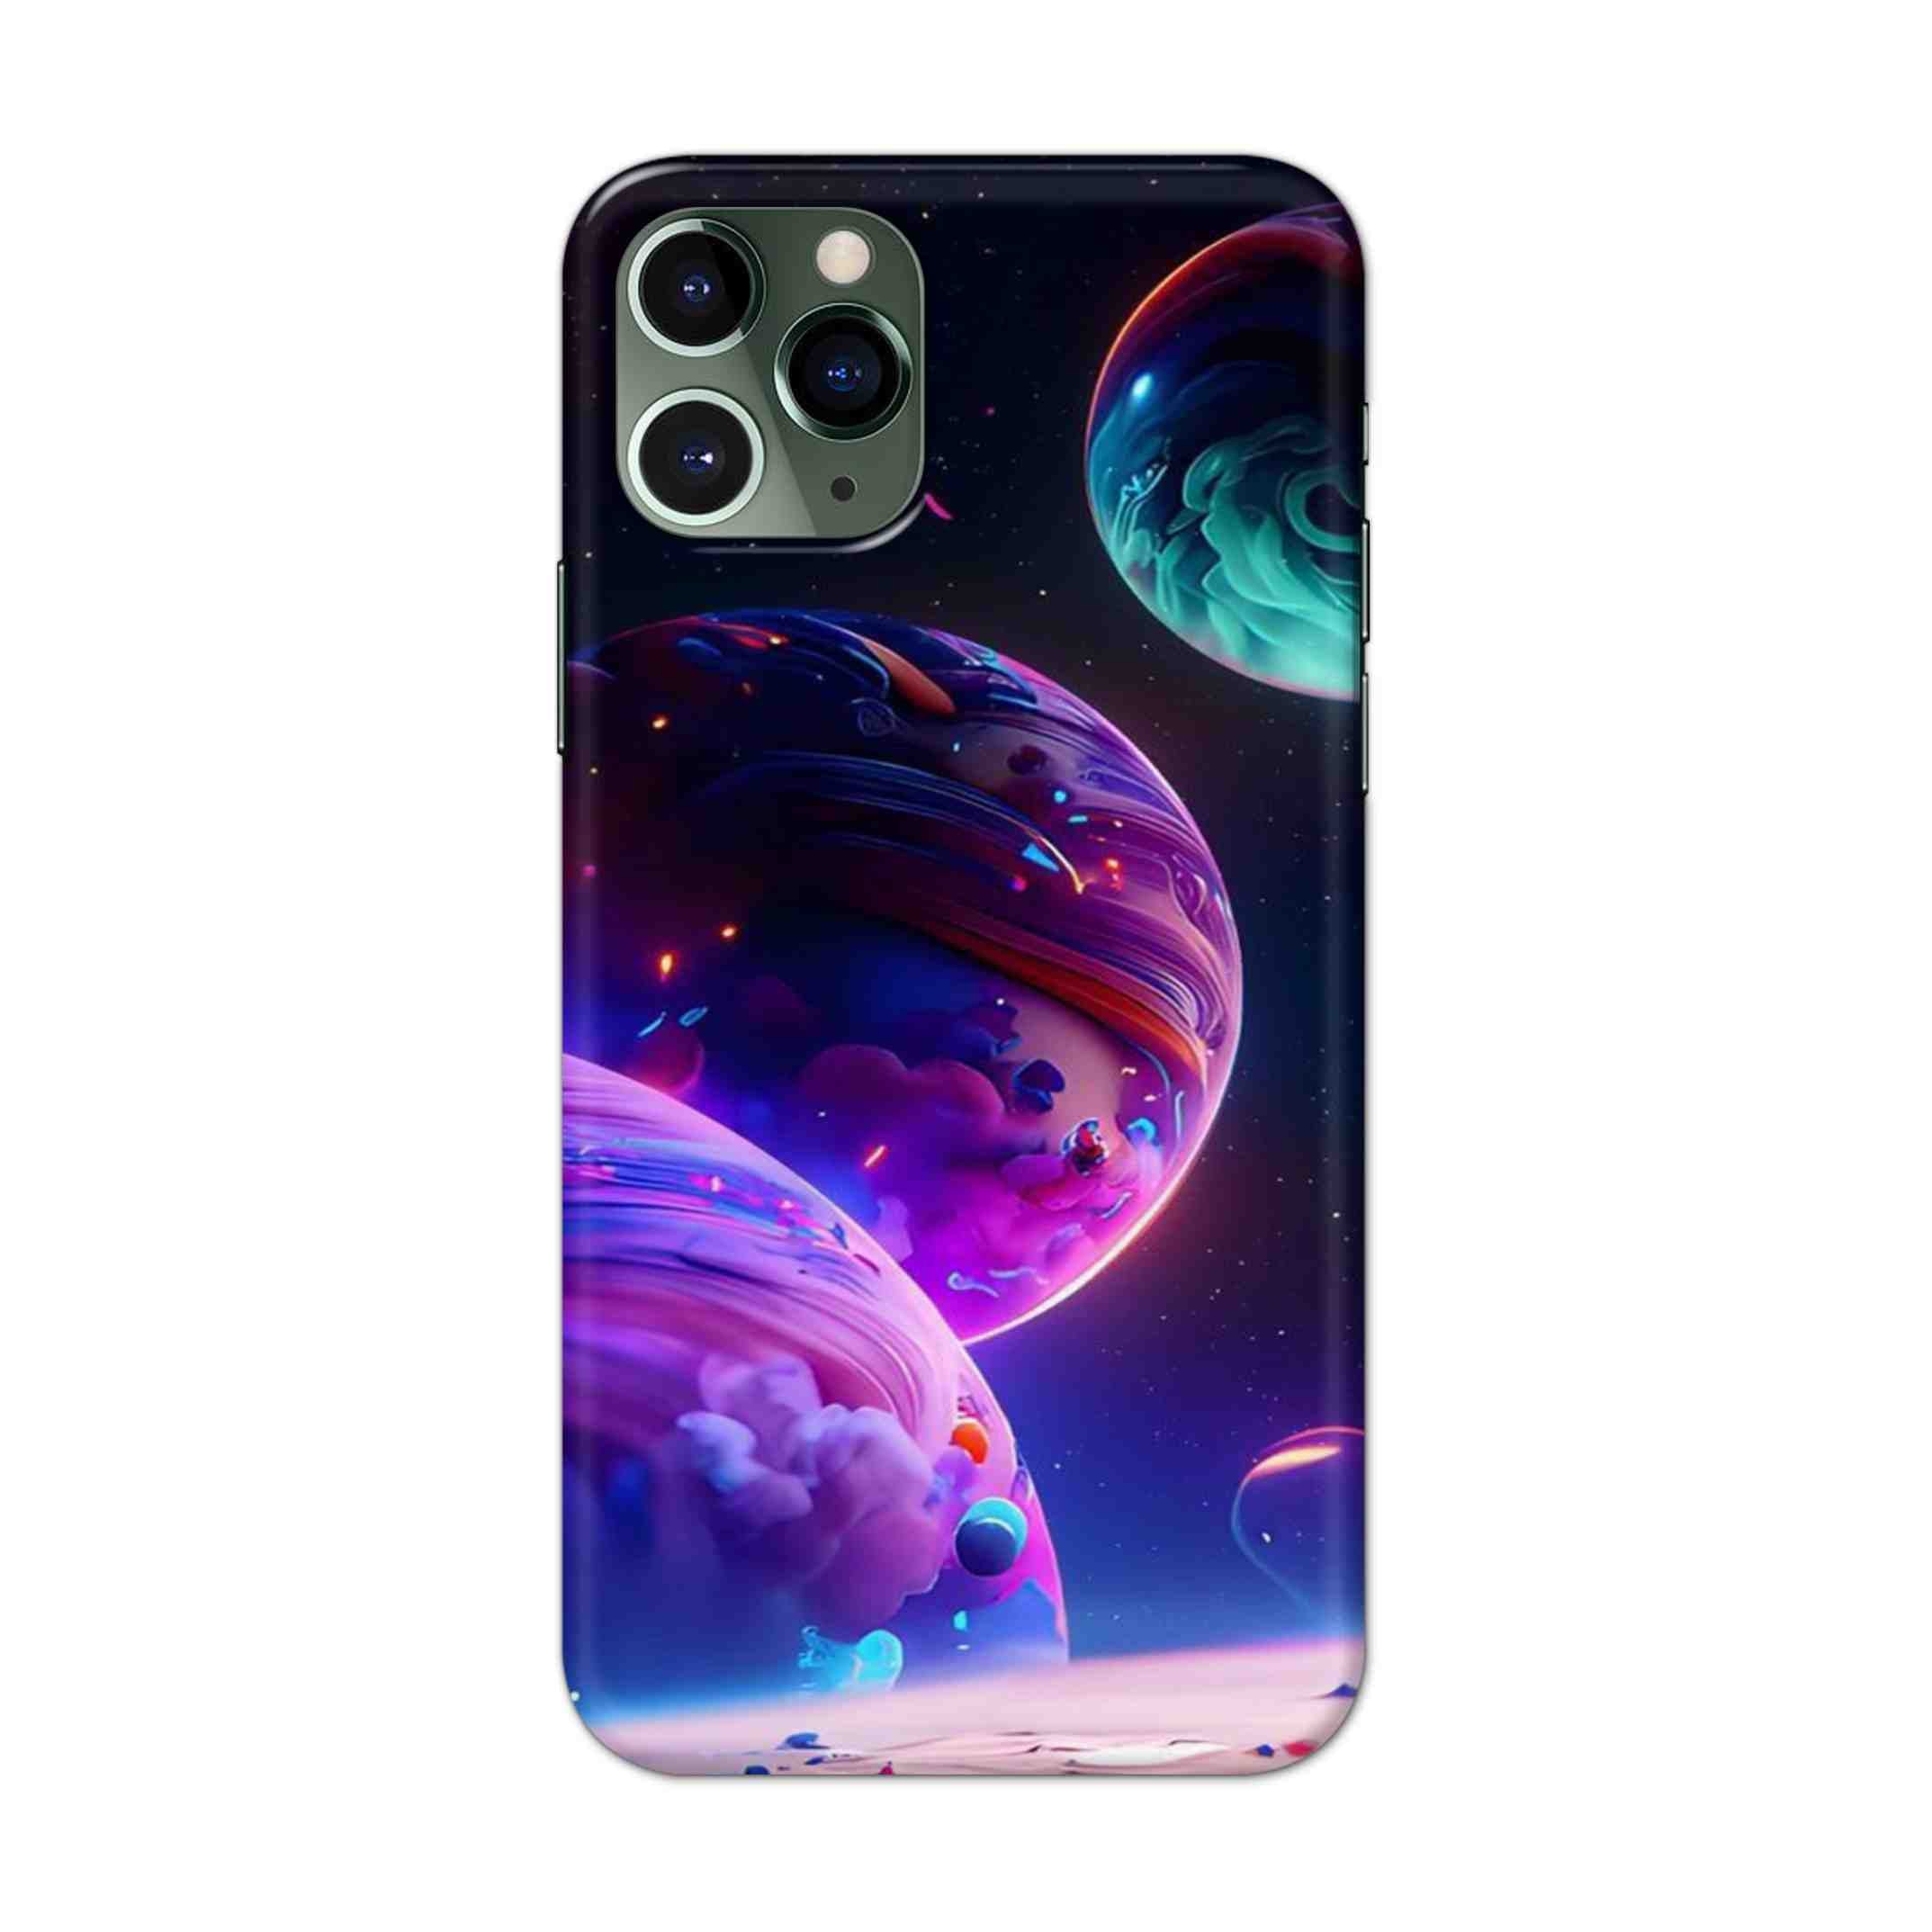 Buy 3 Earth Hard Back Mobile Phone Case/Cover For iPhone 11 Pro Max Online